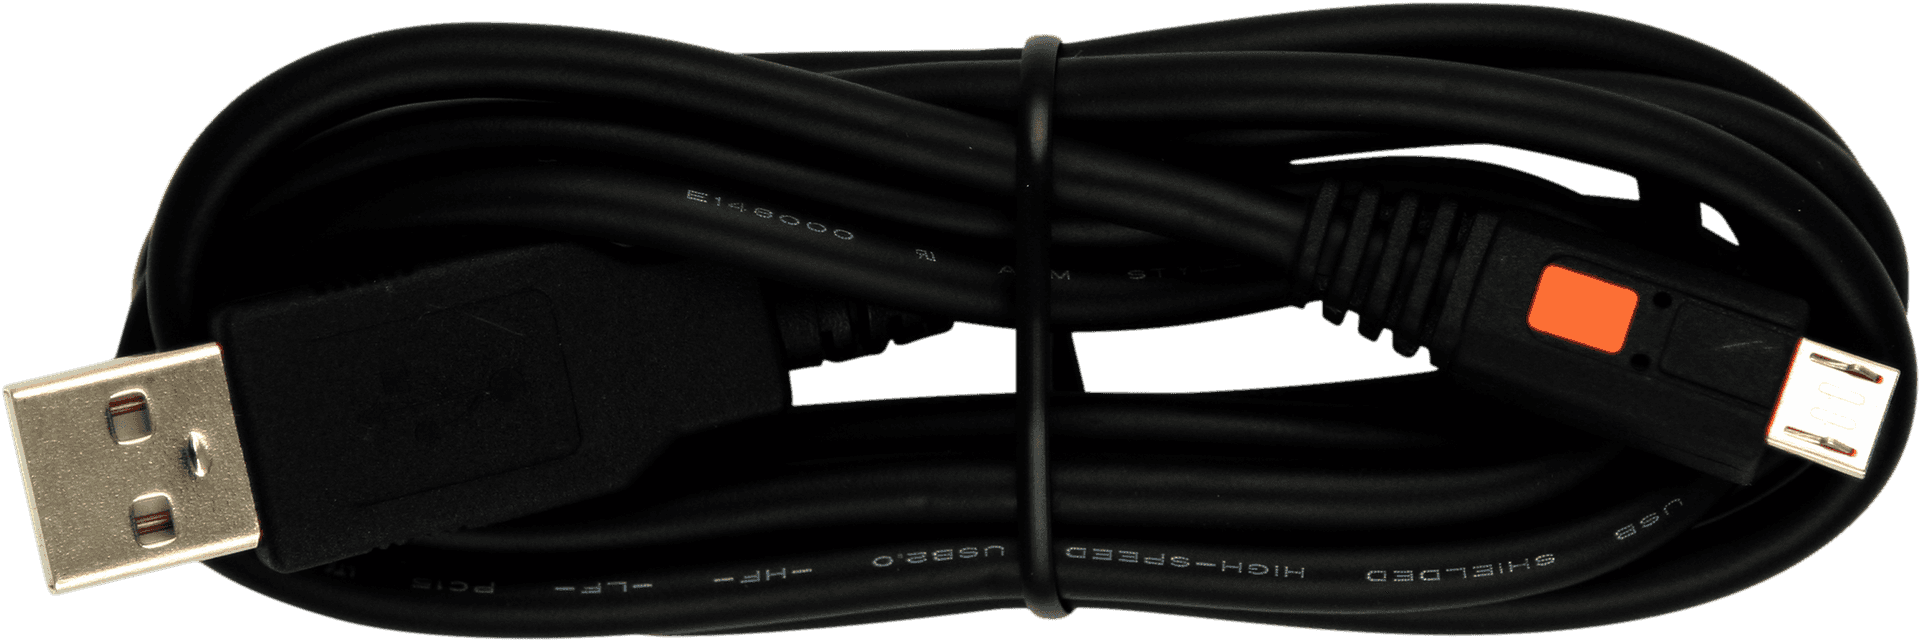 Black U S B Cablewith Red Insert PNG image